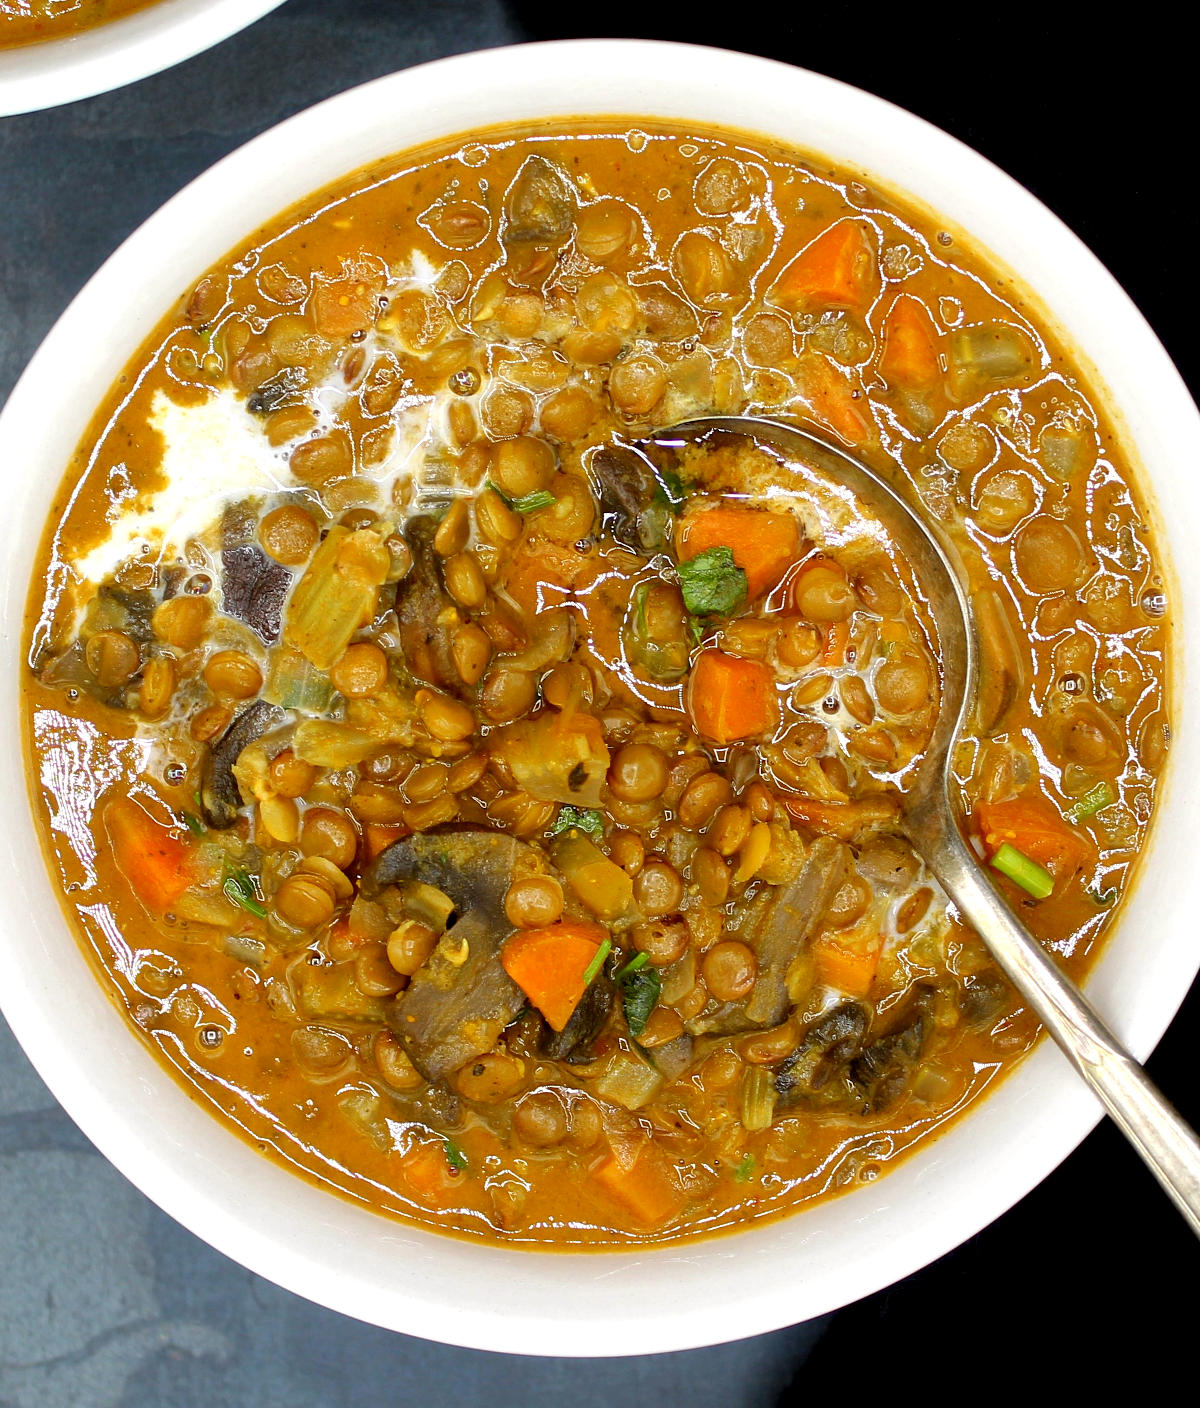 Lentil soup with vegetables and a spoon with coconut milk stirred in.